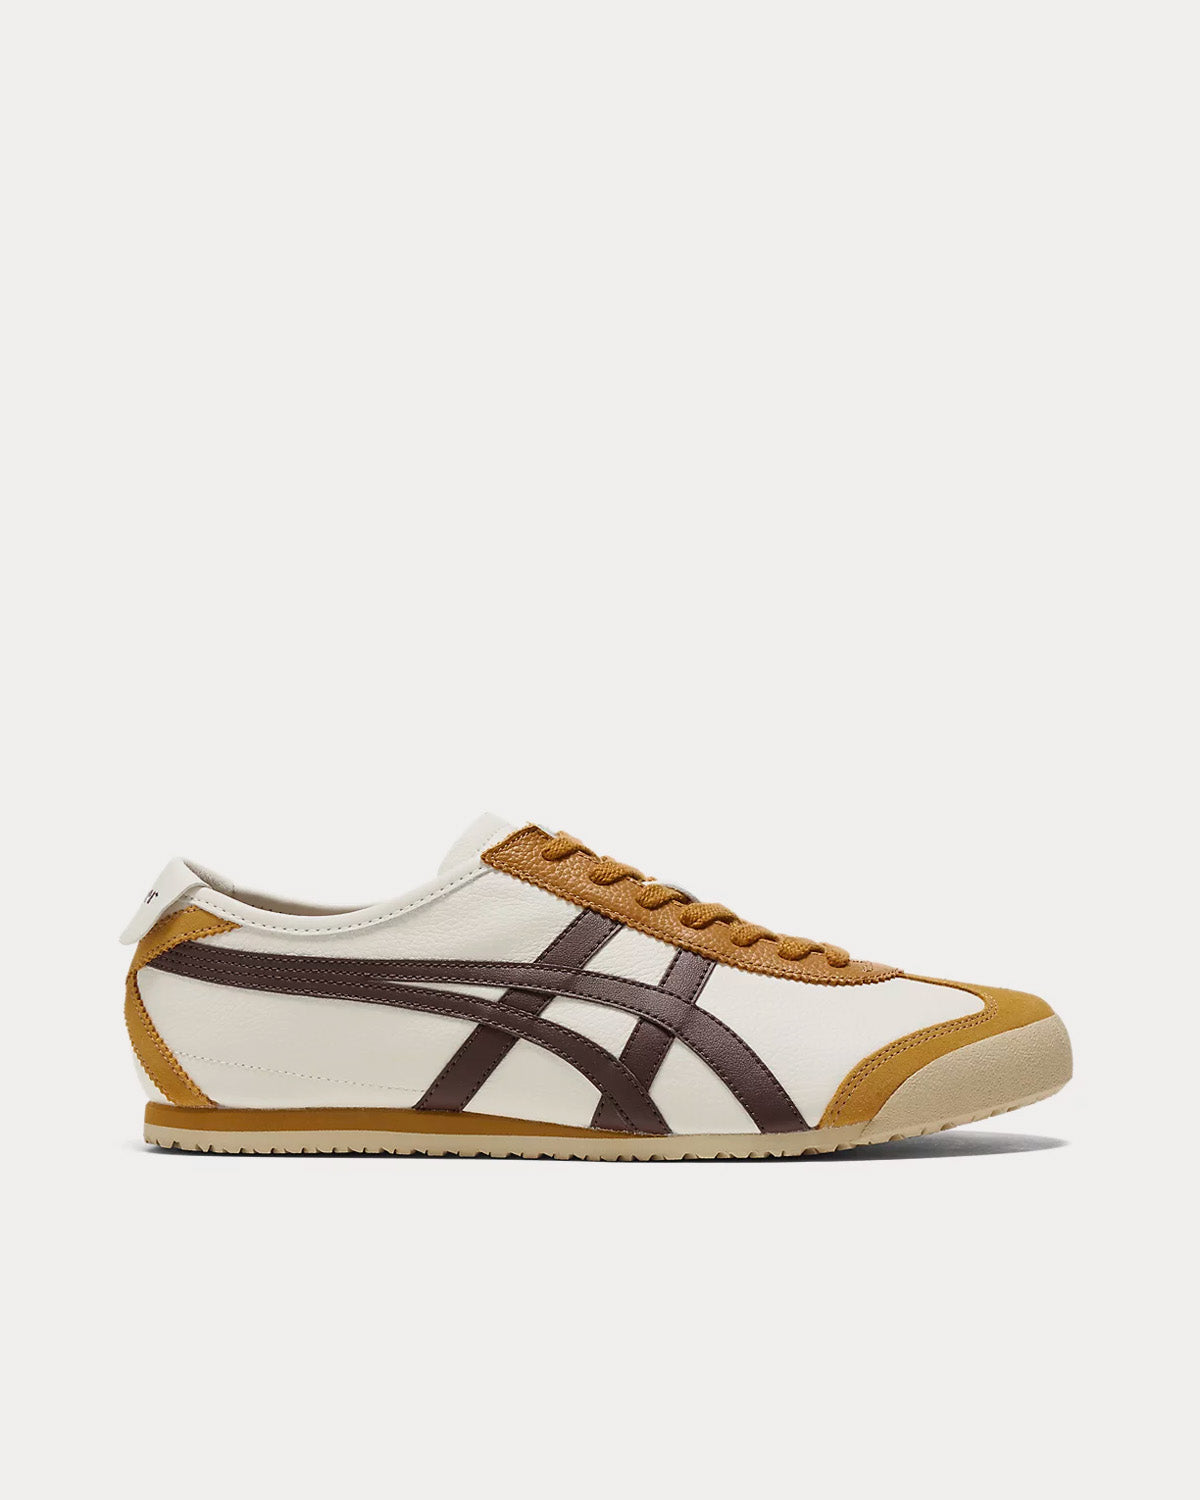 Onitsuka Tiger - Mexico 66 Cream / Licorice Brown Low Top Sneakers